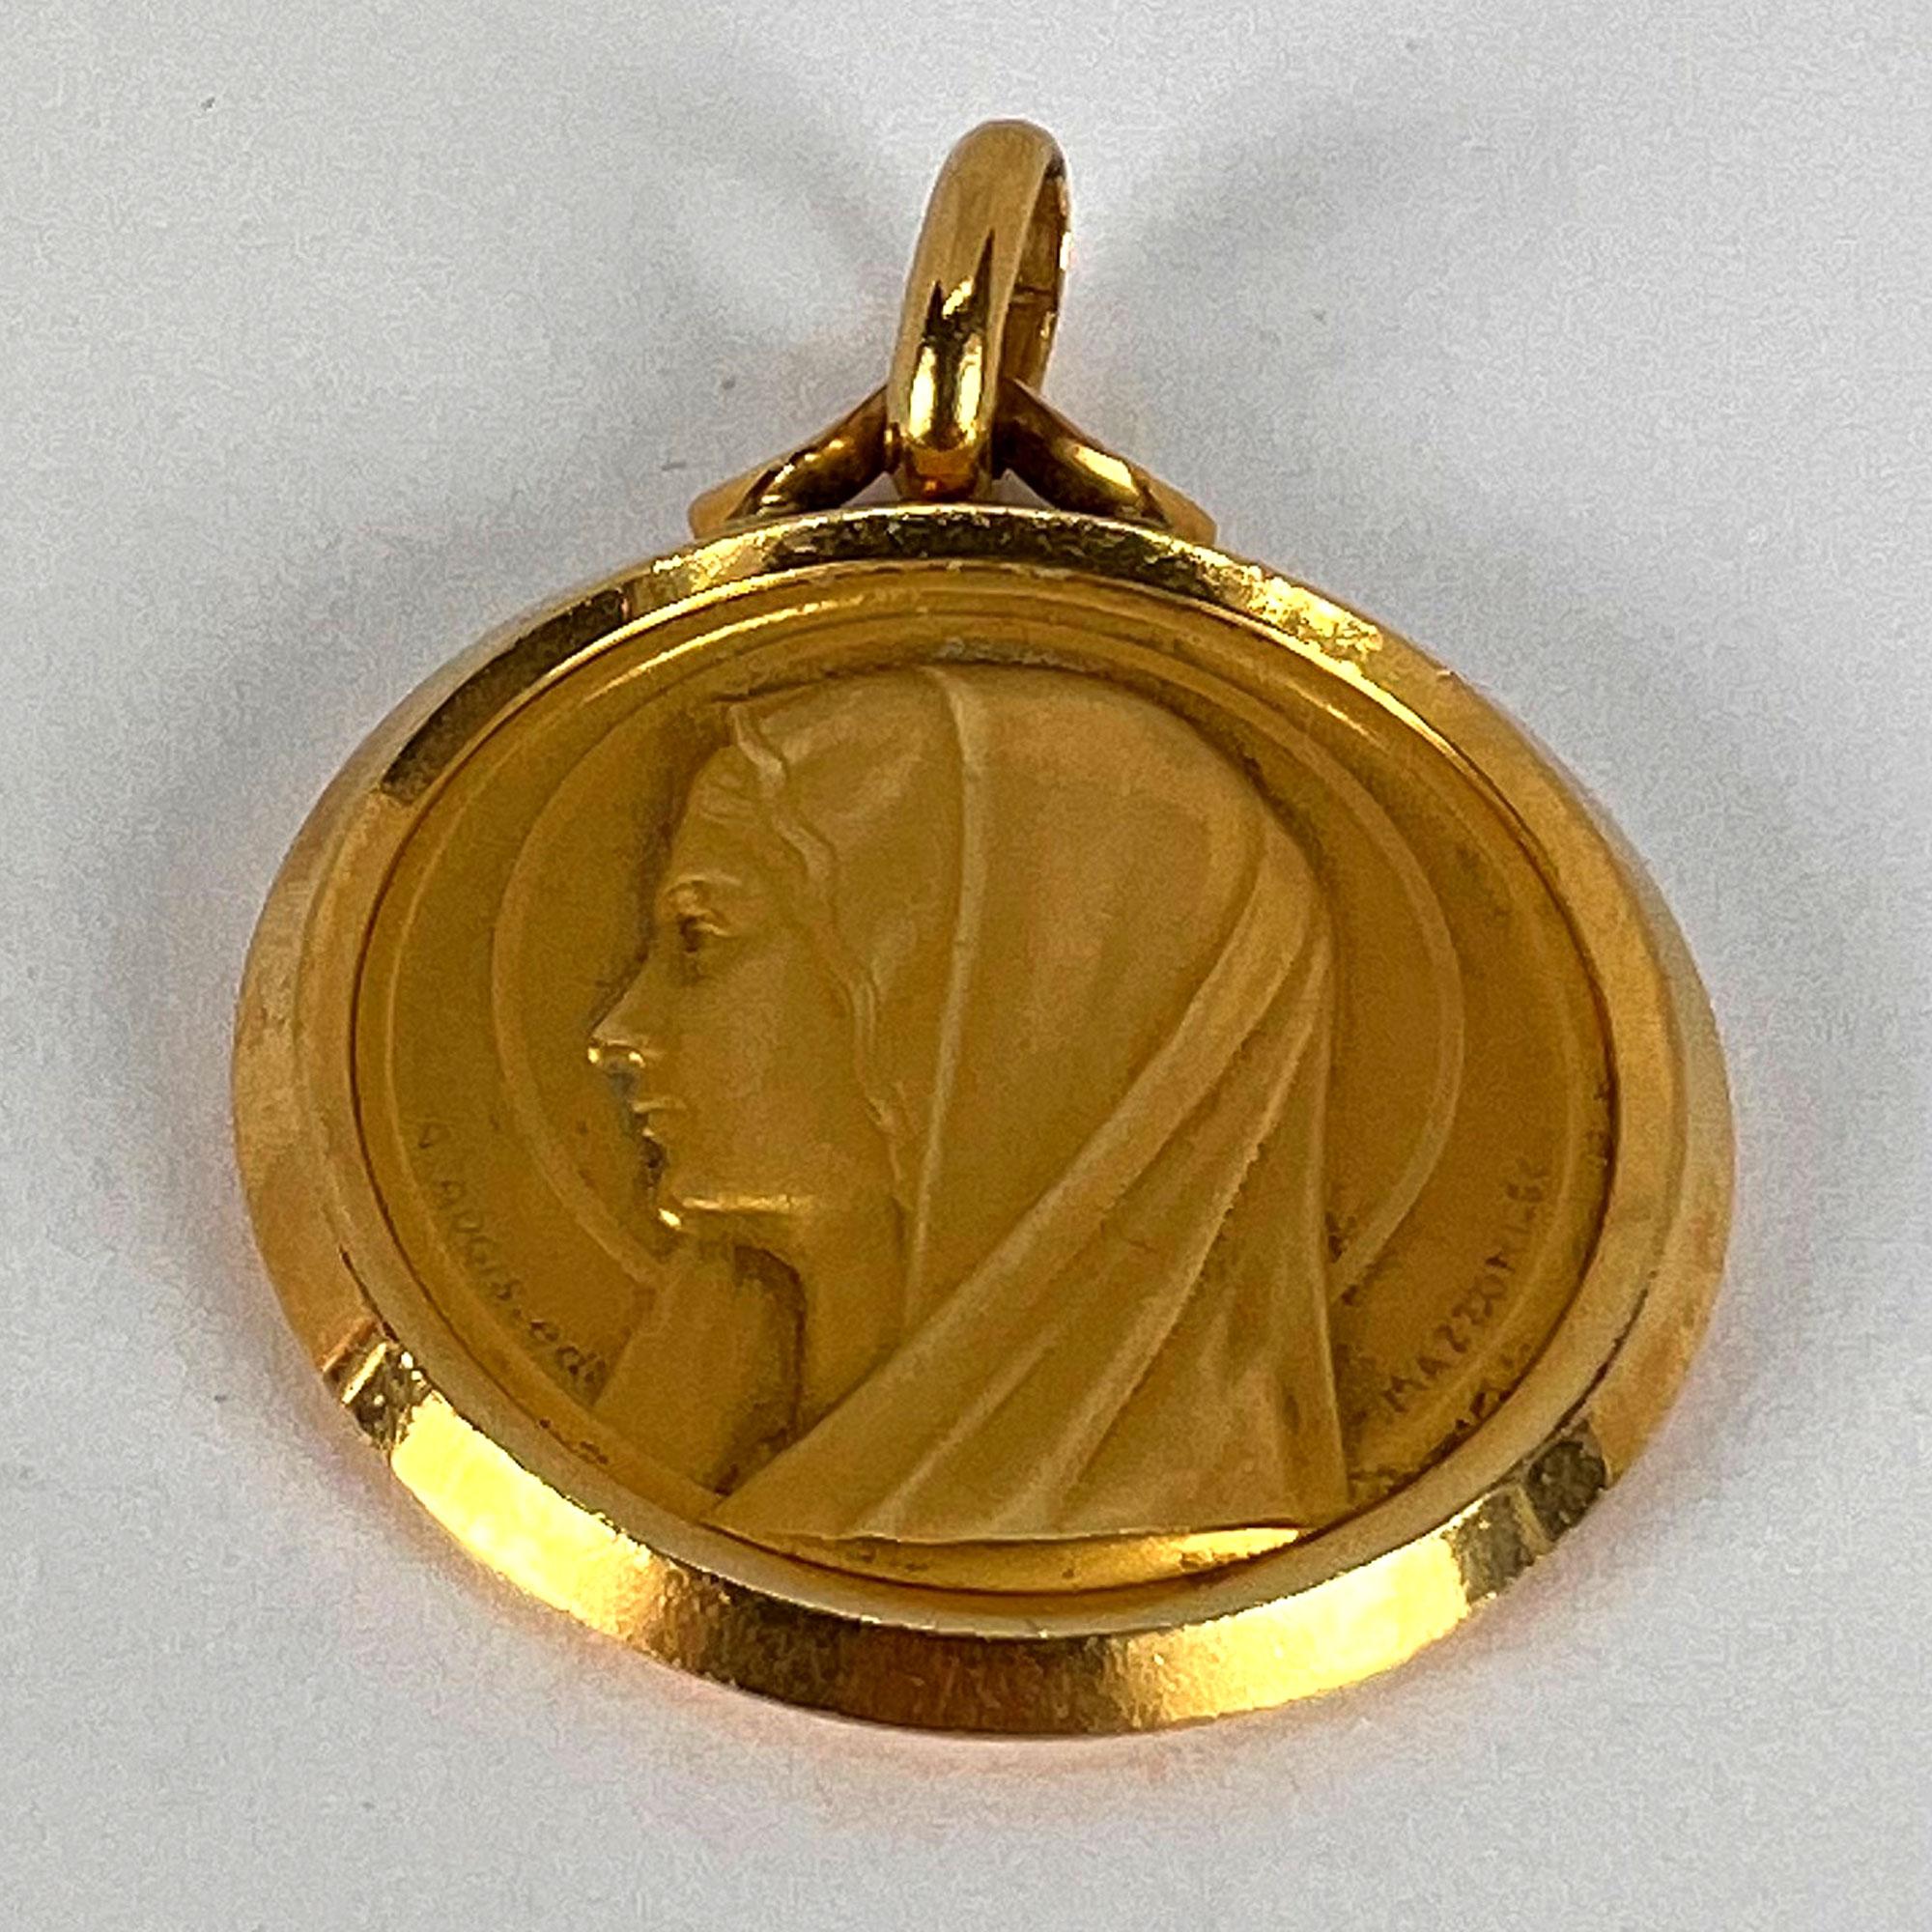 French Augis Mazzoni Virgin Mary 18K Yellow Gold Pendant For Sale 2